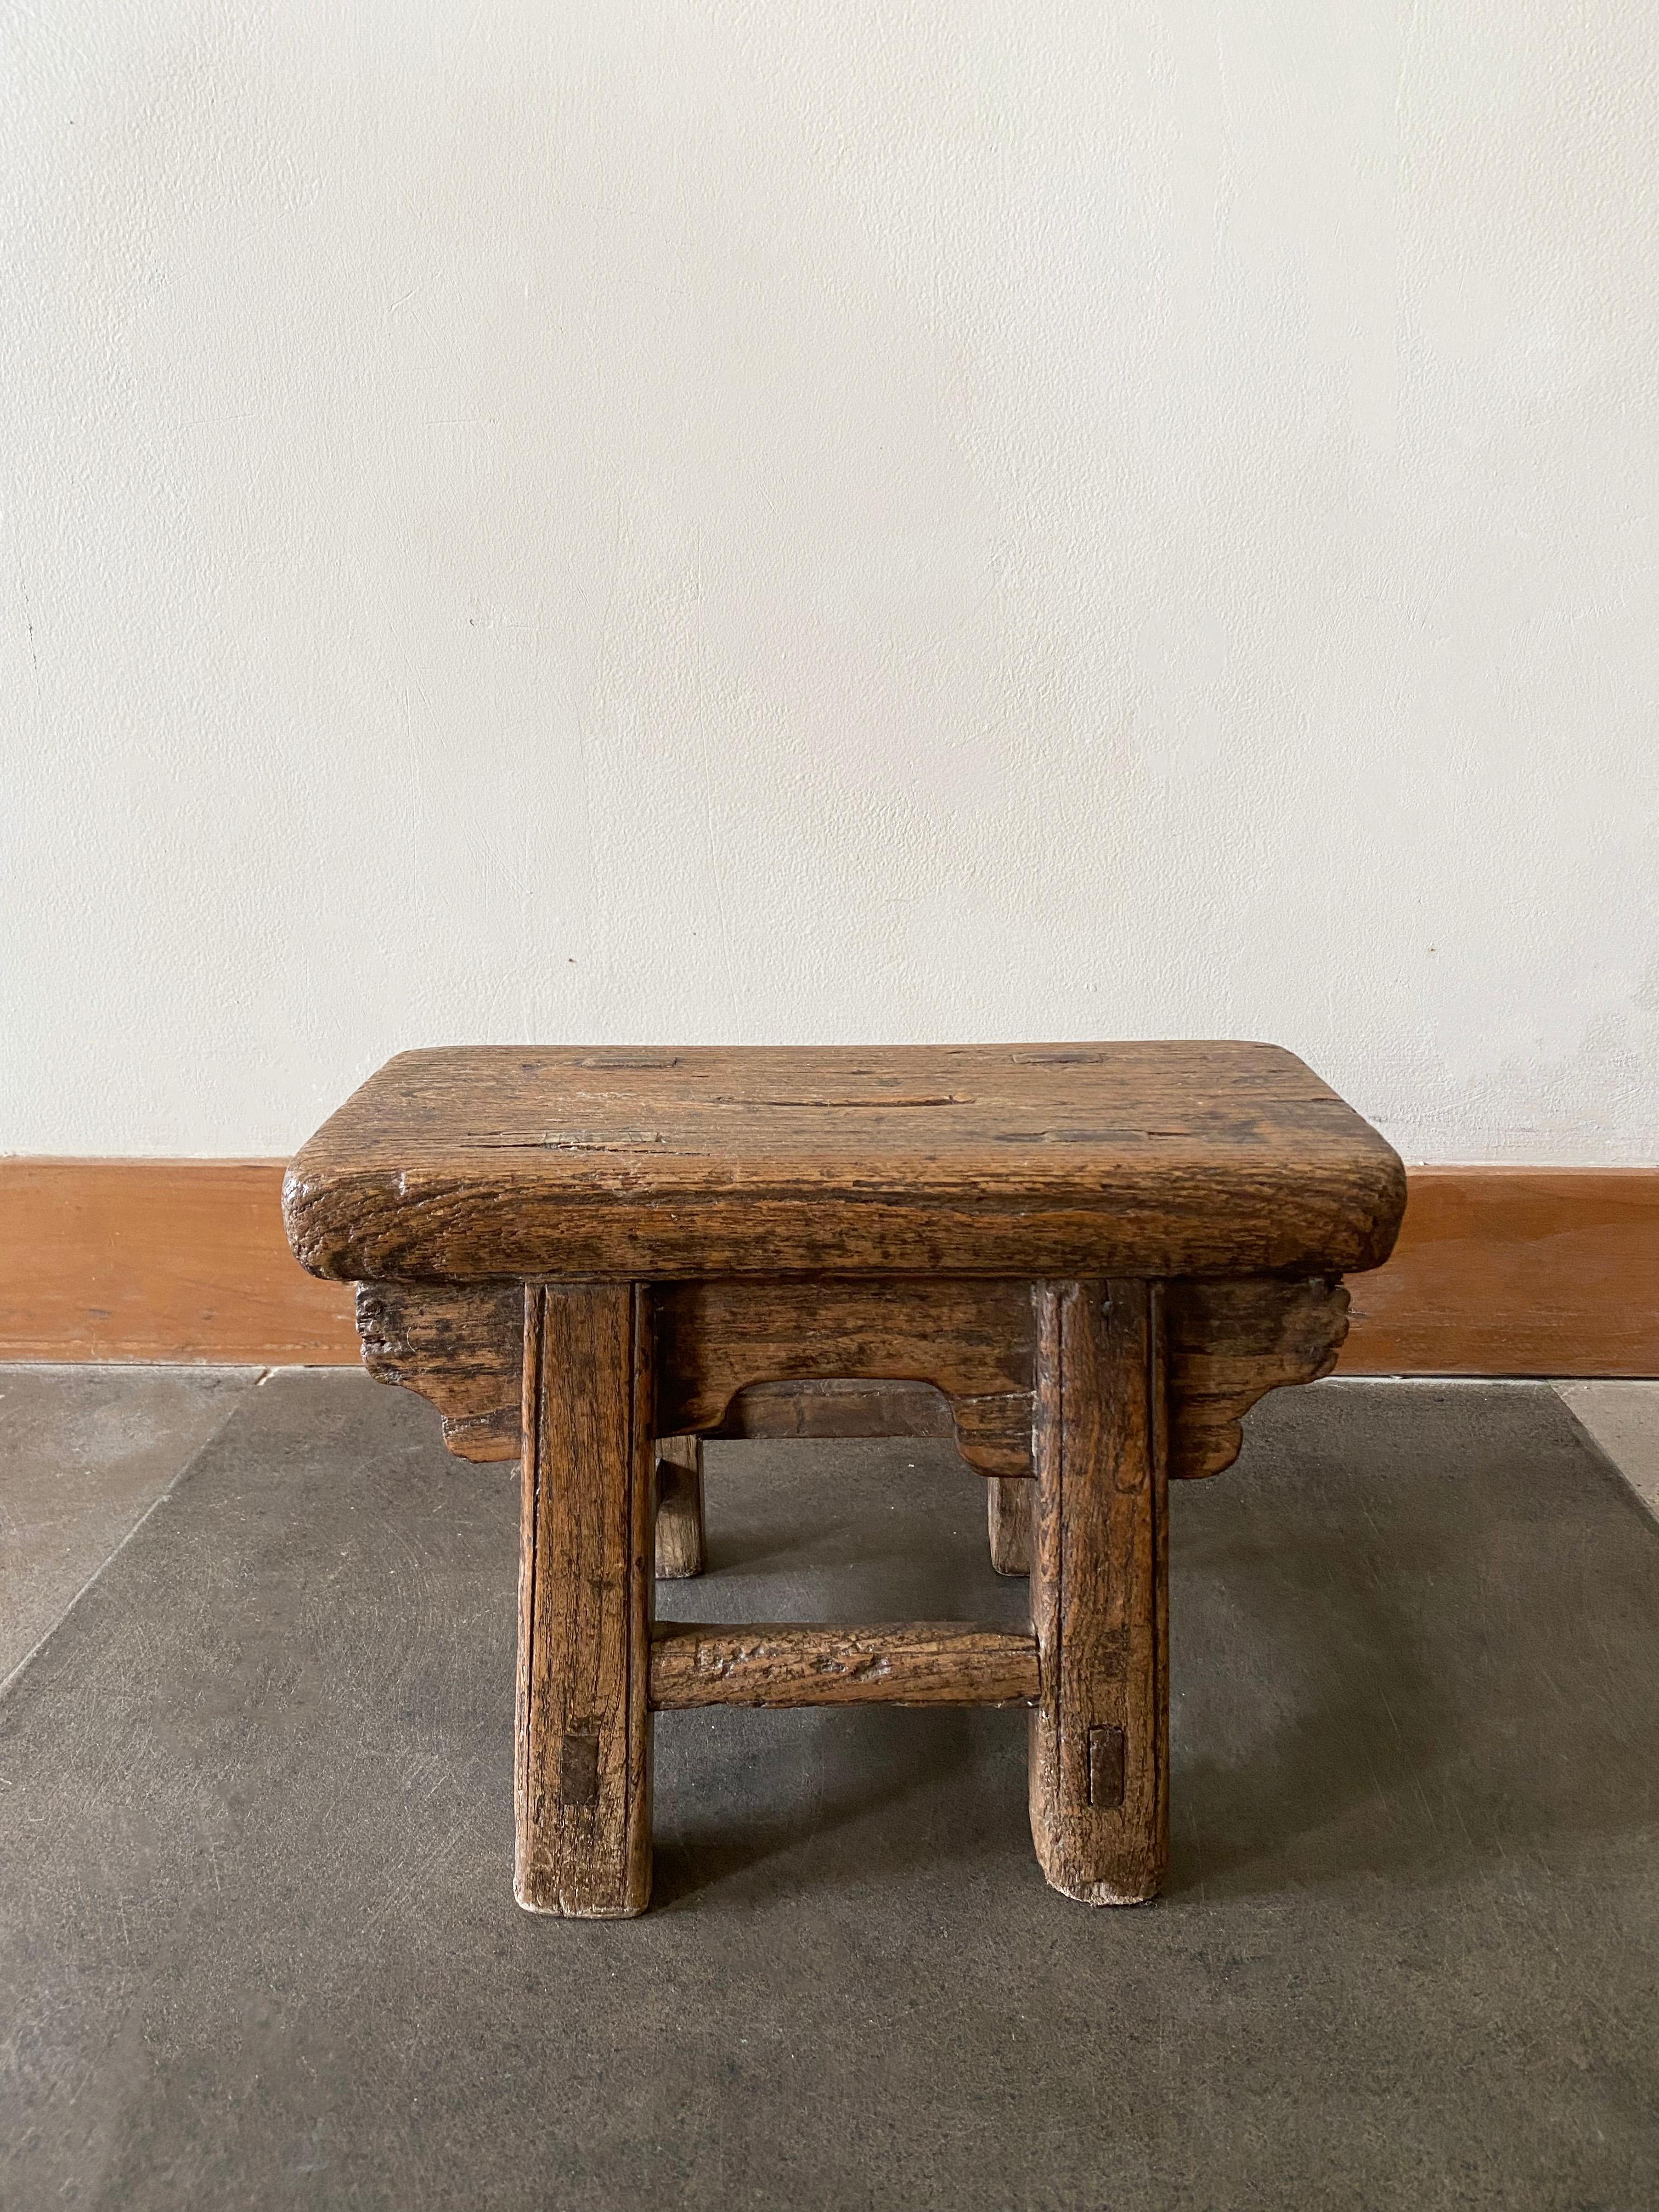 This antique mini stool features a beautiful age related patina and lacquered finish. It remains sturdy and robust, a fantastic piece to use as a drink table, table stool or for displaying small items. It dates to the early 20th century / Qing